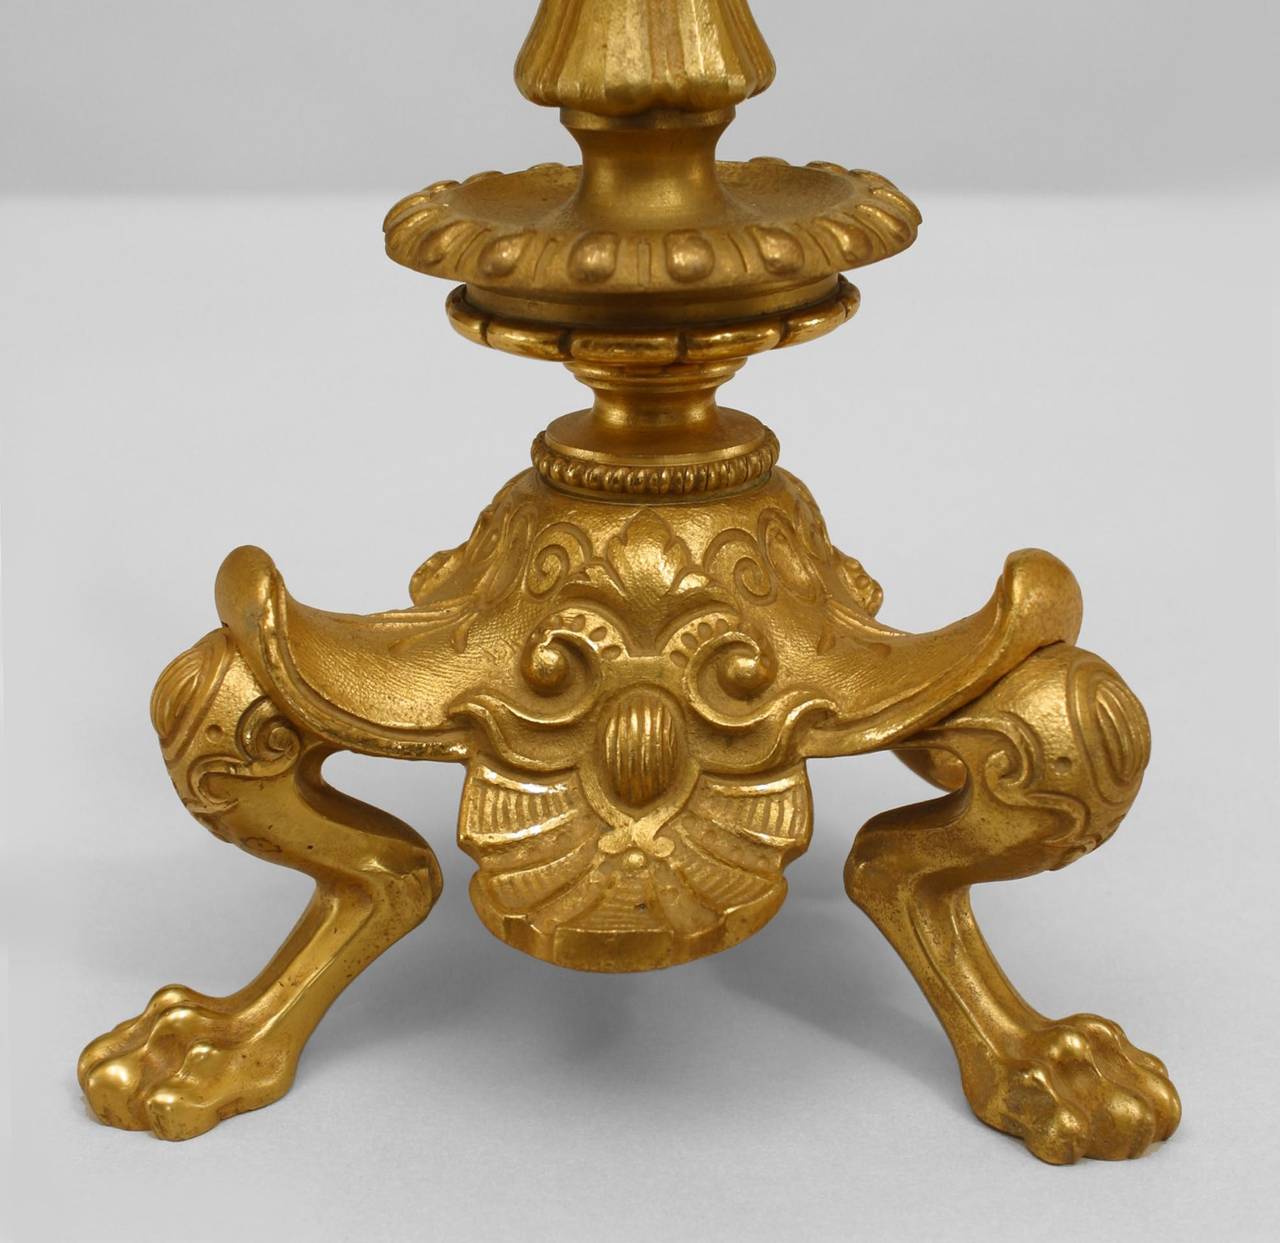 Pair of English Regency-style (19th Century) gilt bronze candlesticks with 3 claw feet and urn top (PRICED PER Pair)
